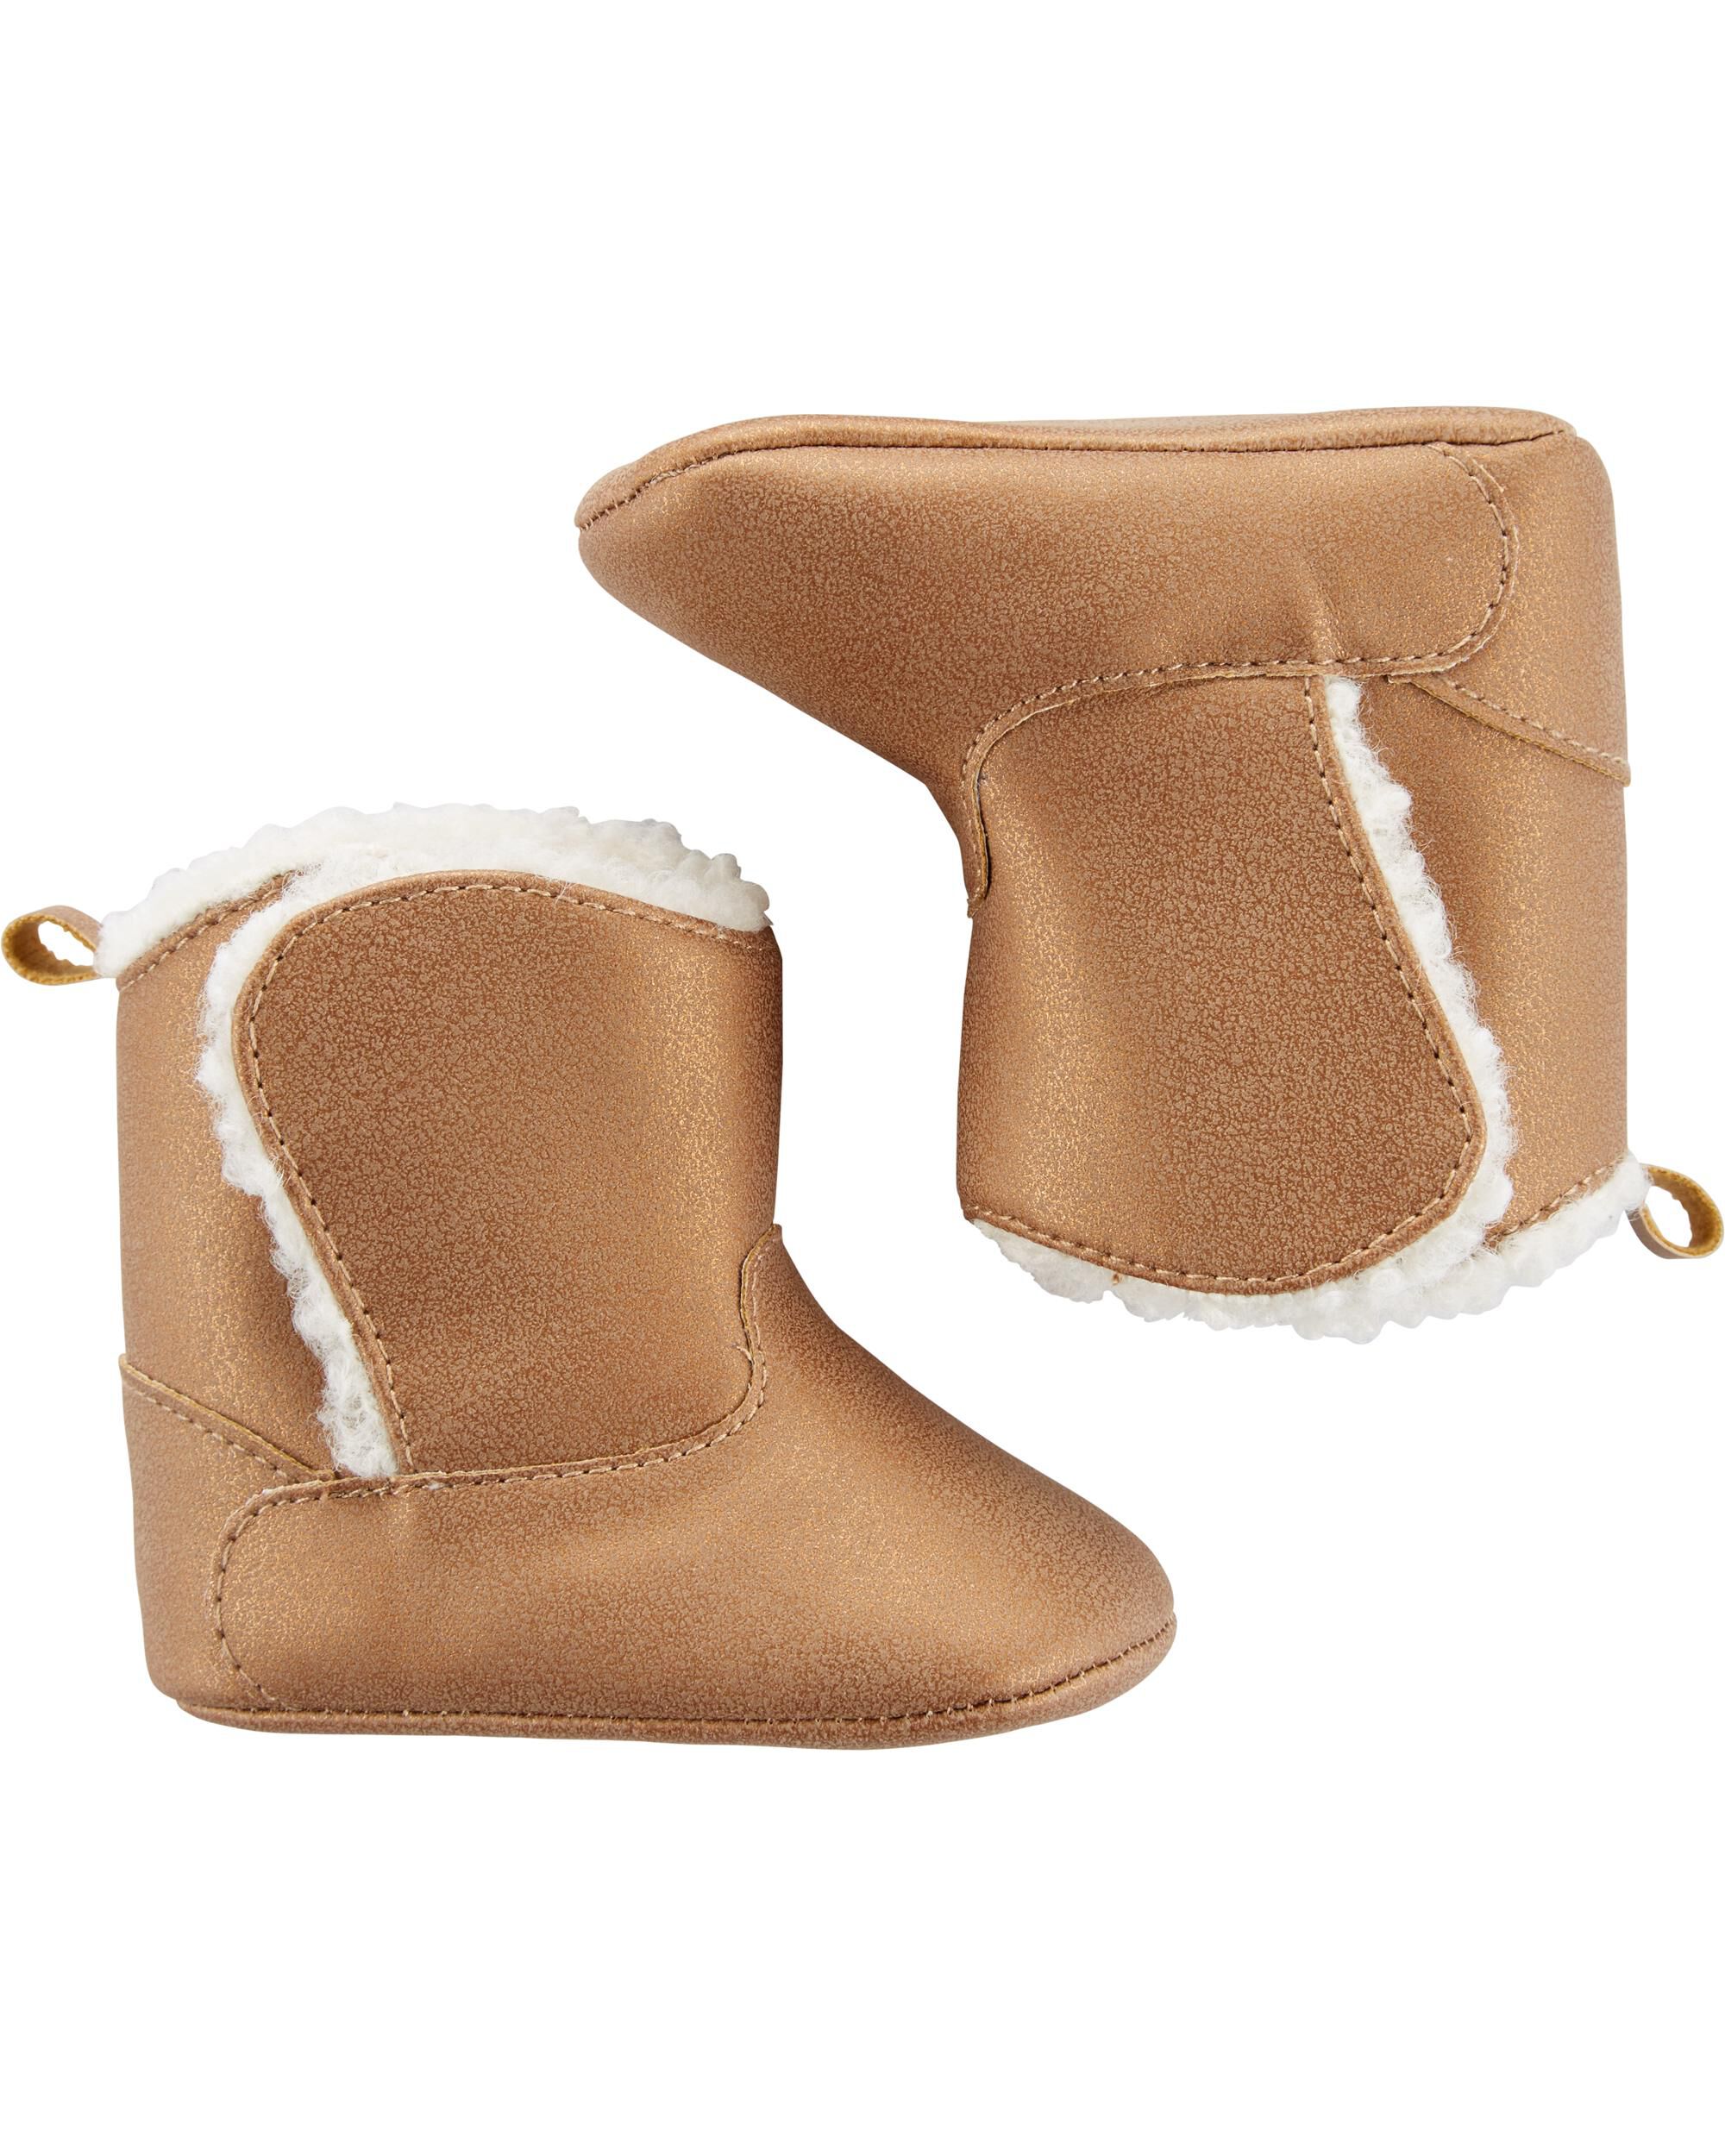 Carter's Sherpa Boot Baby Shoes 